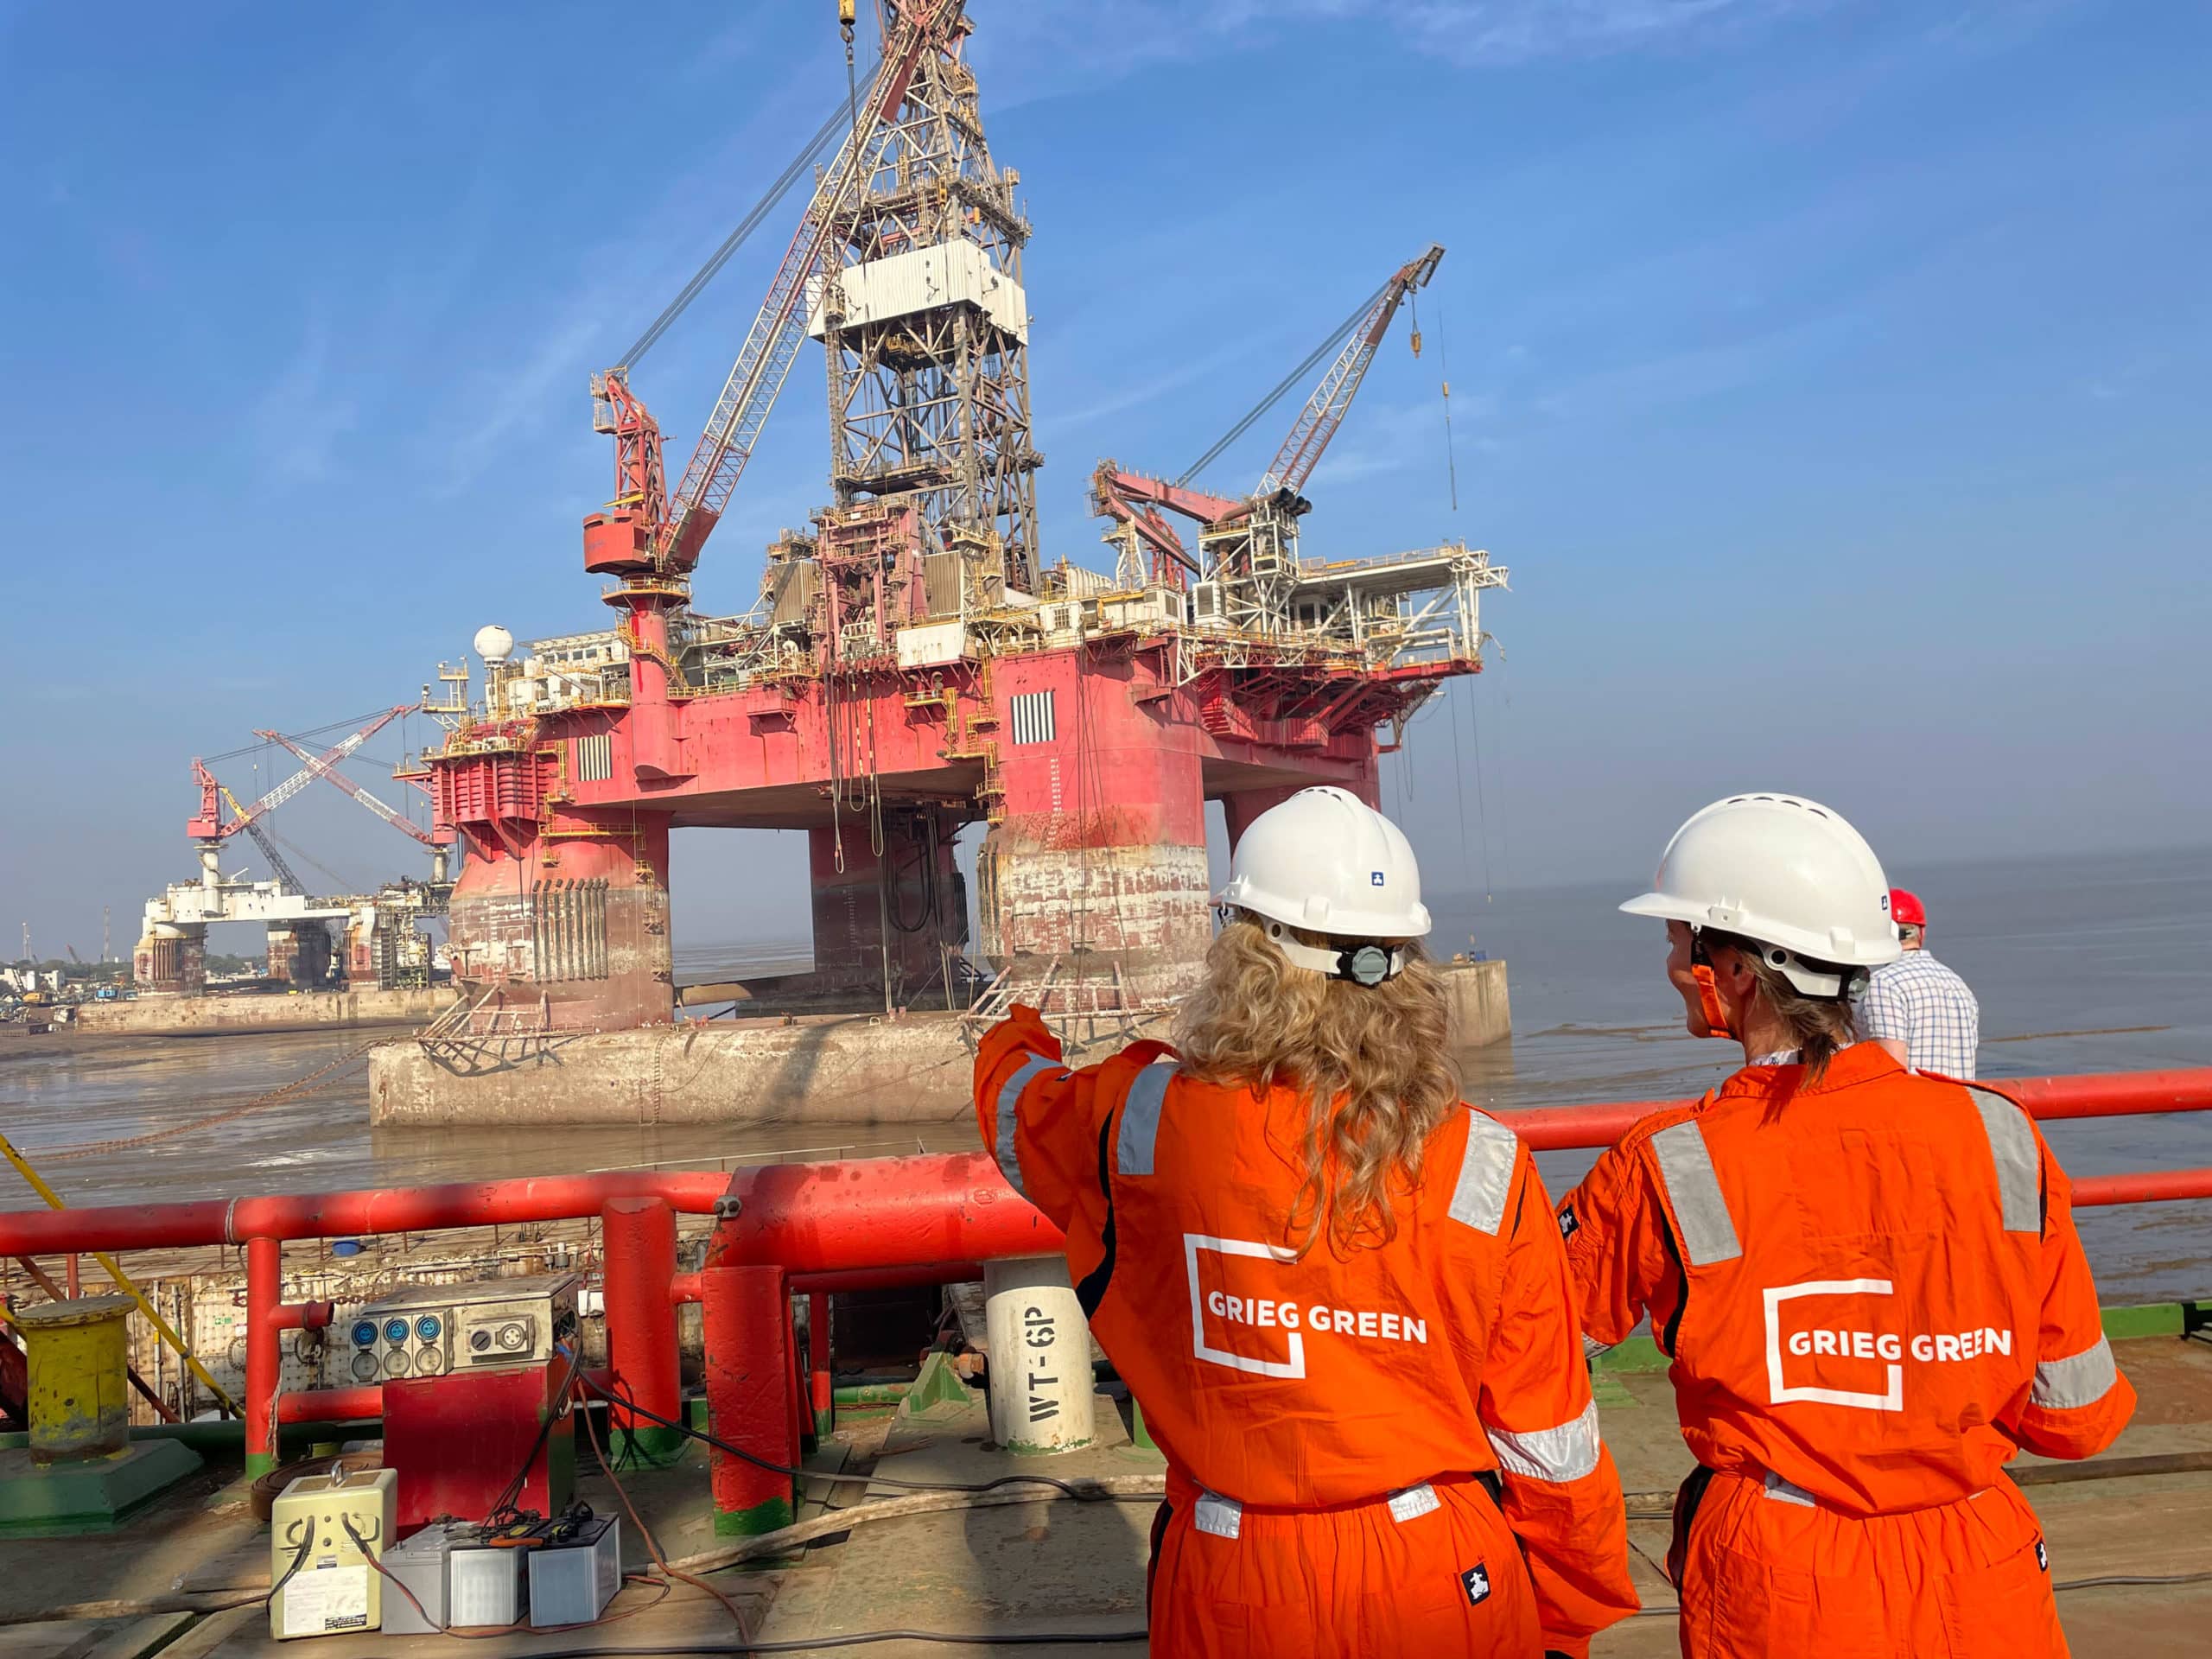 Two experts at Grieg Green checking out a offshore platform.